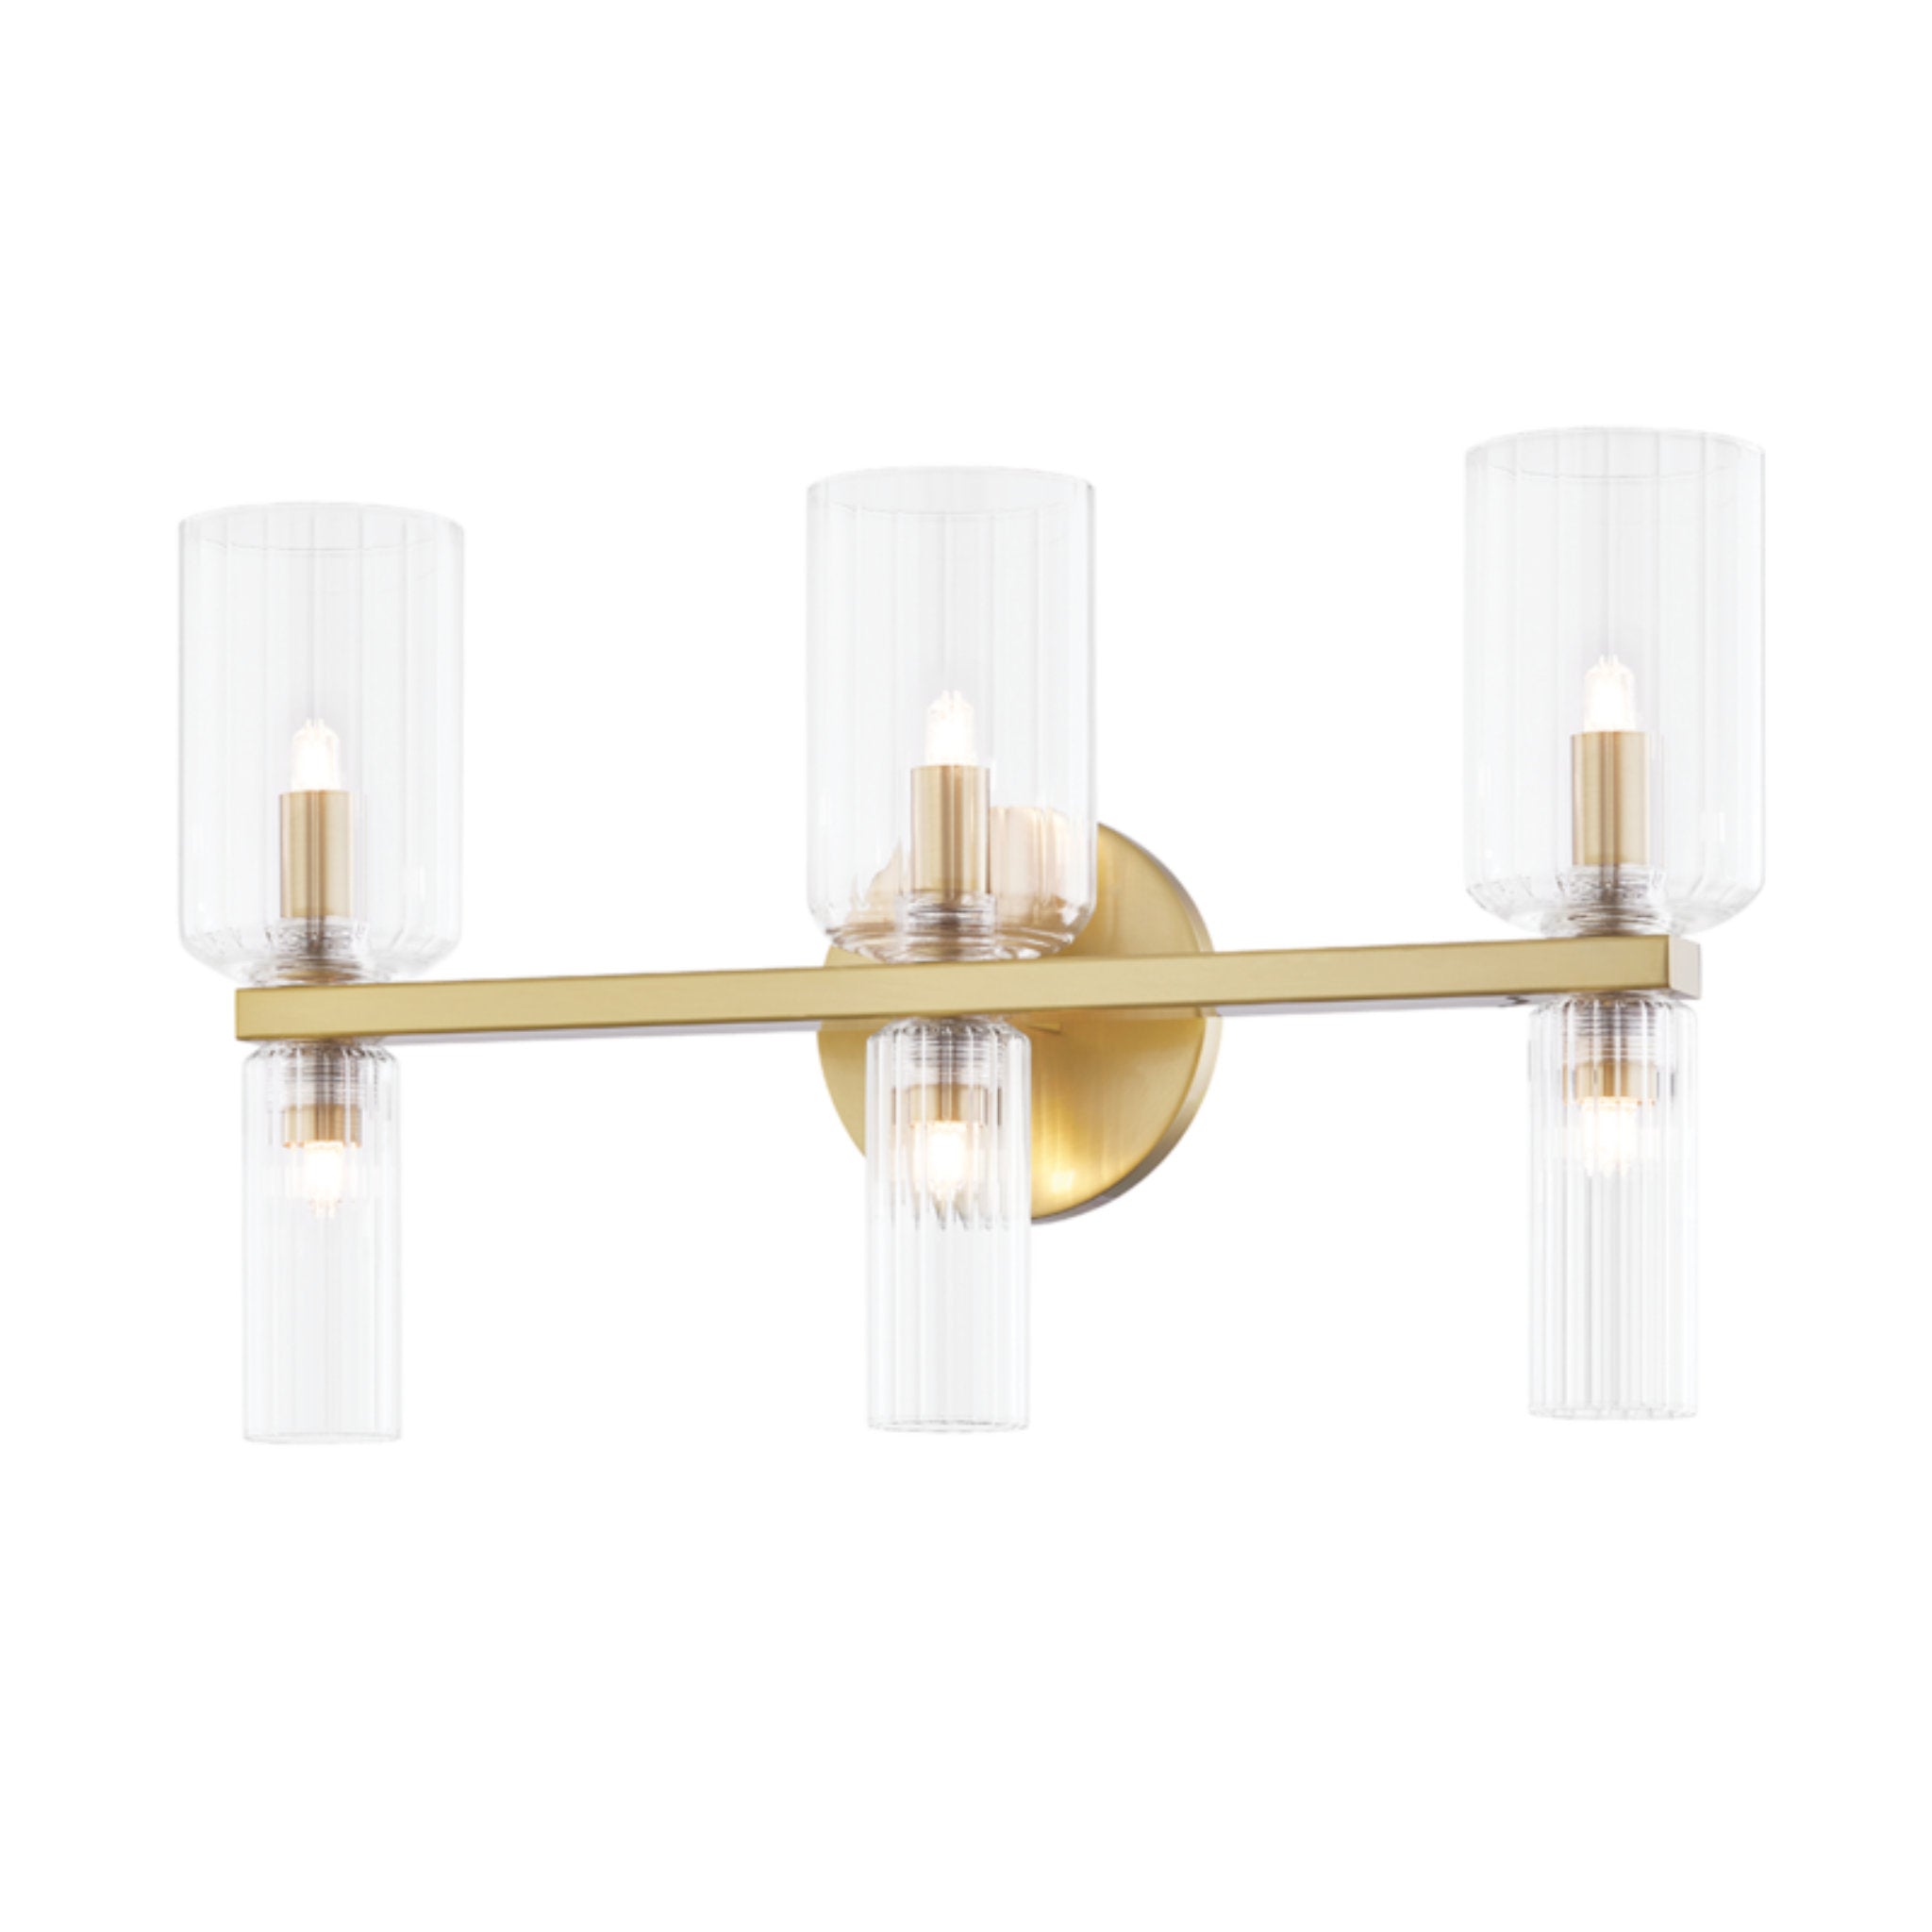 Tabitha 6-Light Bath and Vanity in Aged Brass